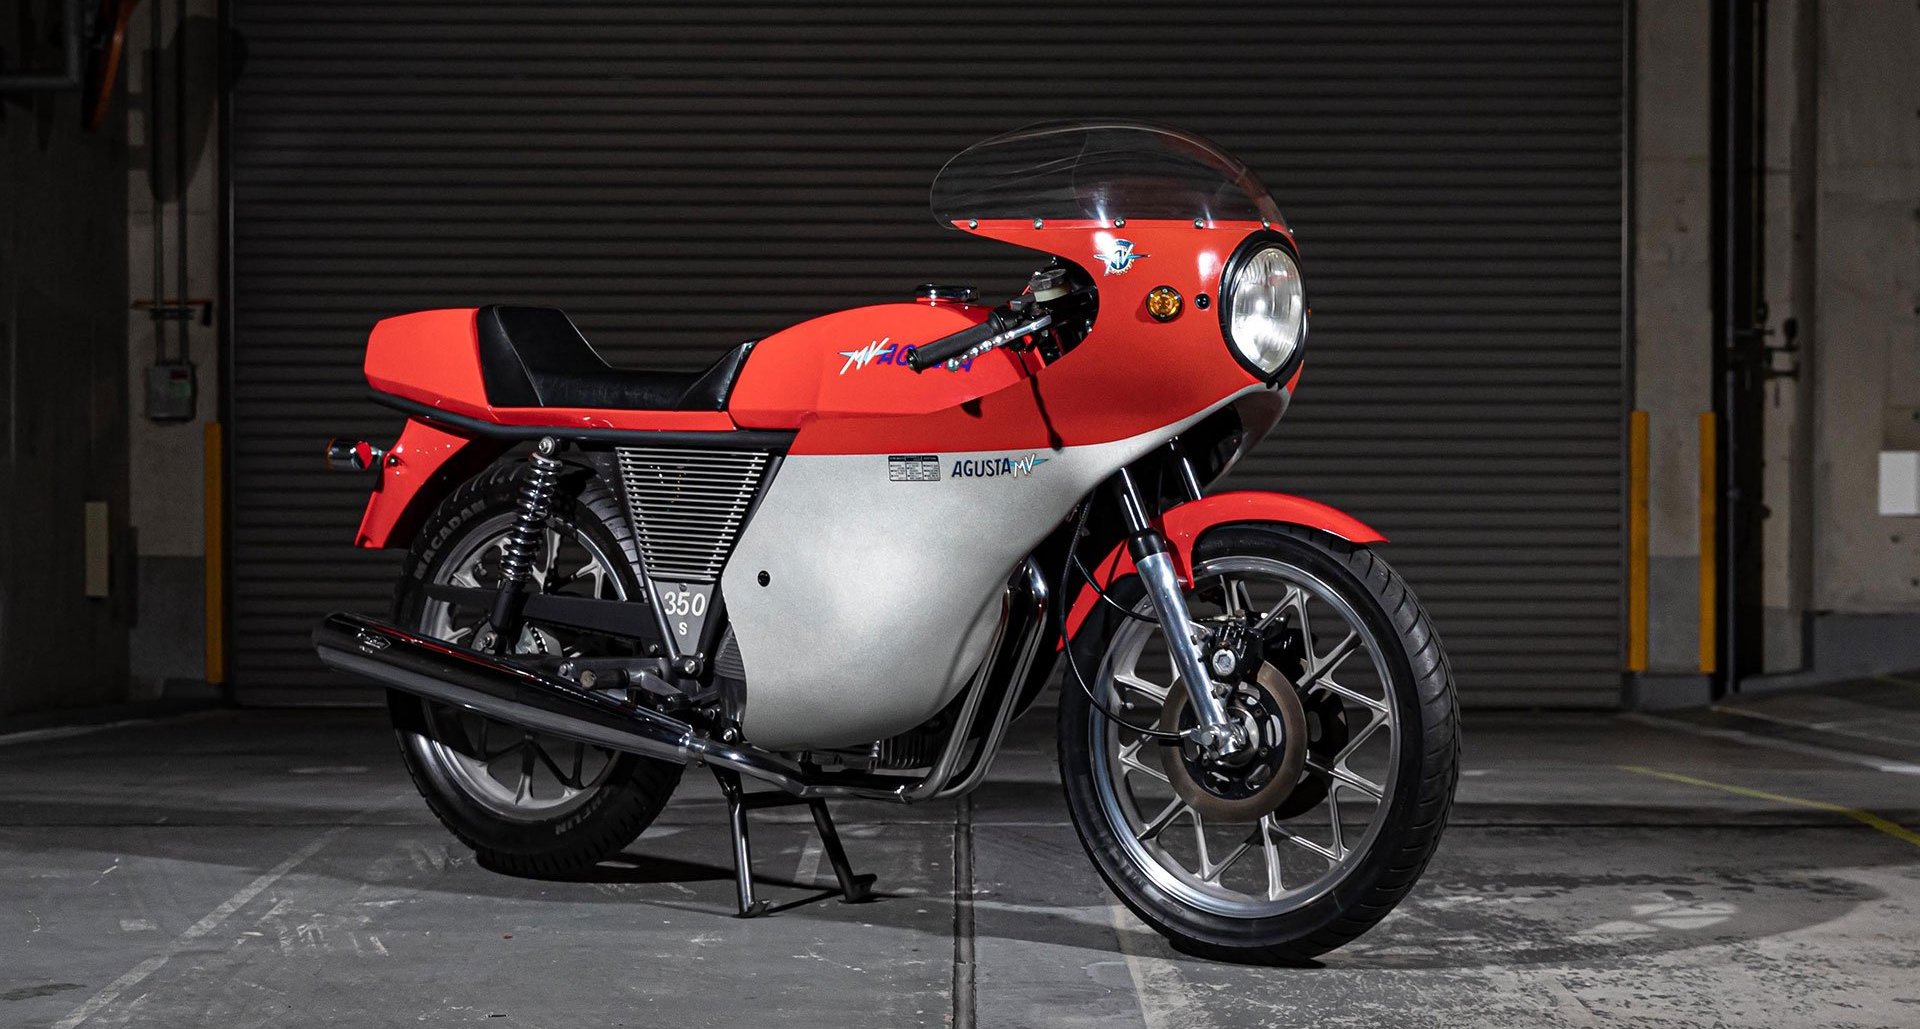 We would fly to Tokyo for this Giugiaro-designed MV Agusta 350S